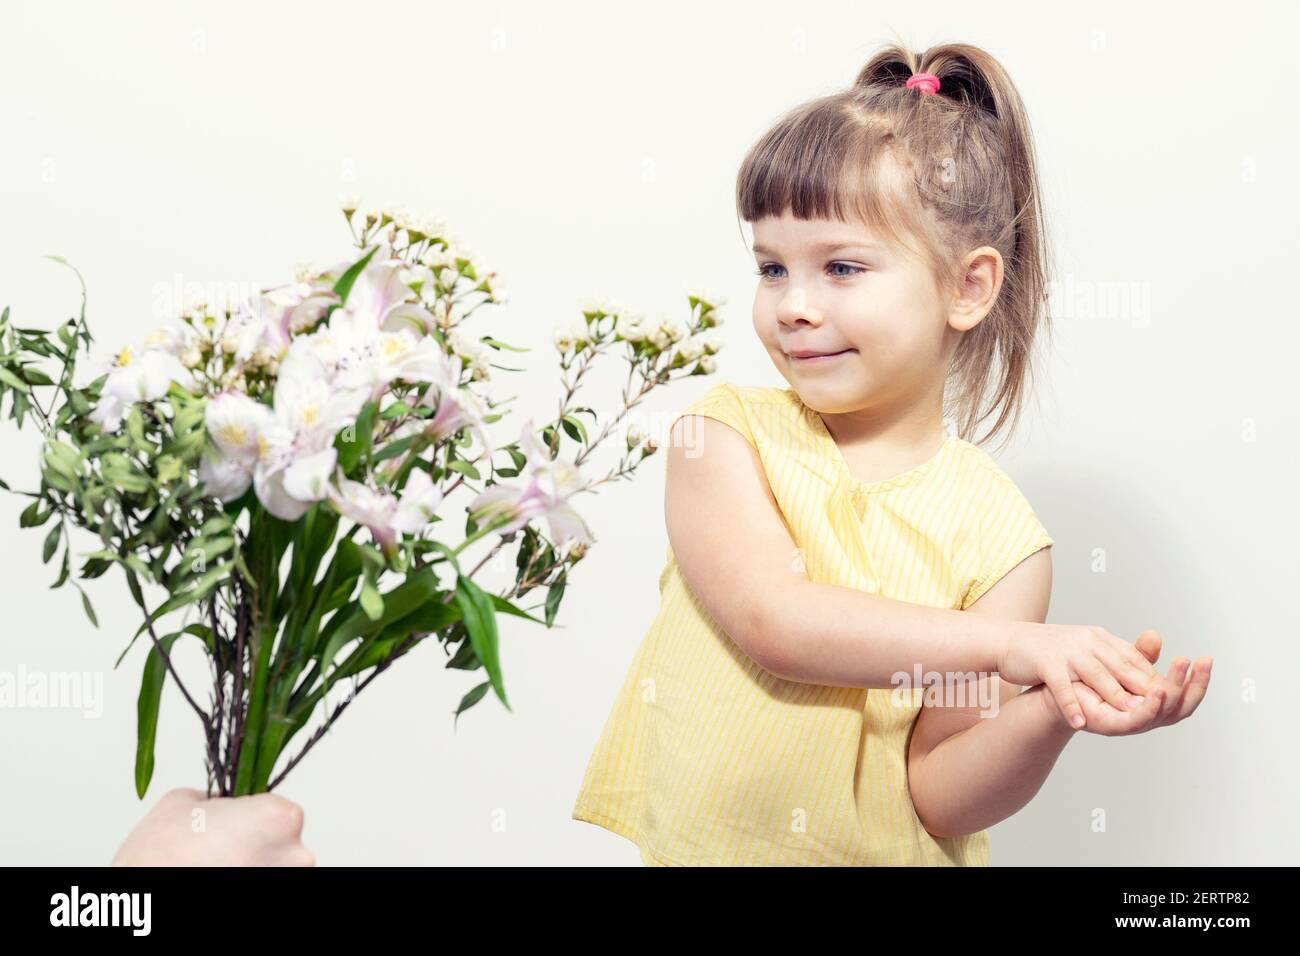 a man's hand holds out a bouquet of white flowers to a cute little girl Stock Photo